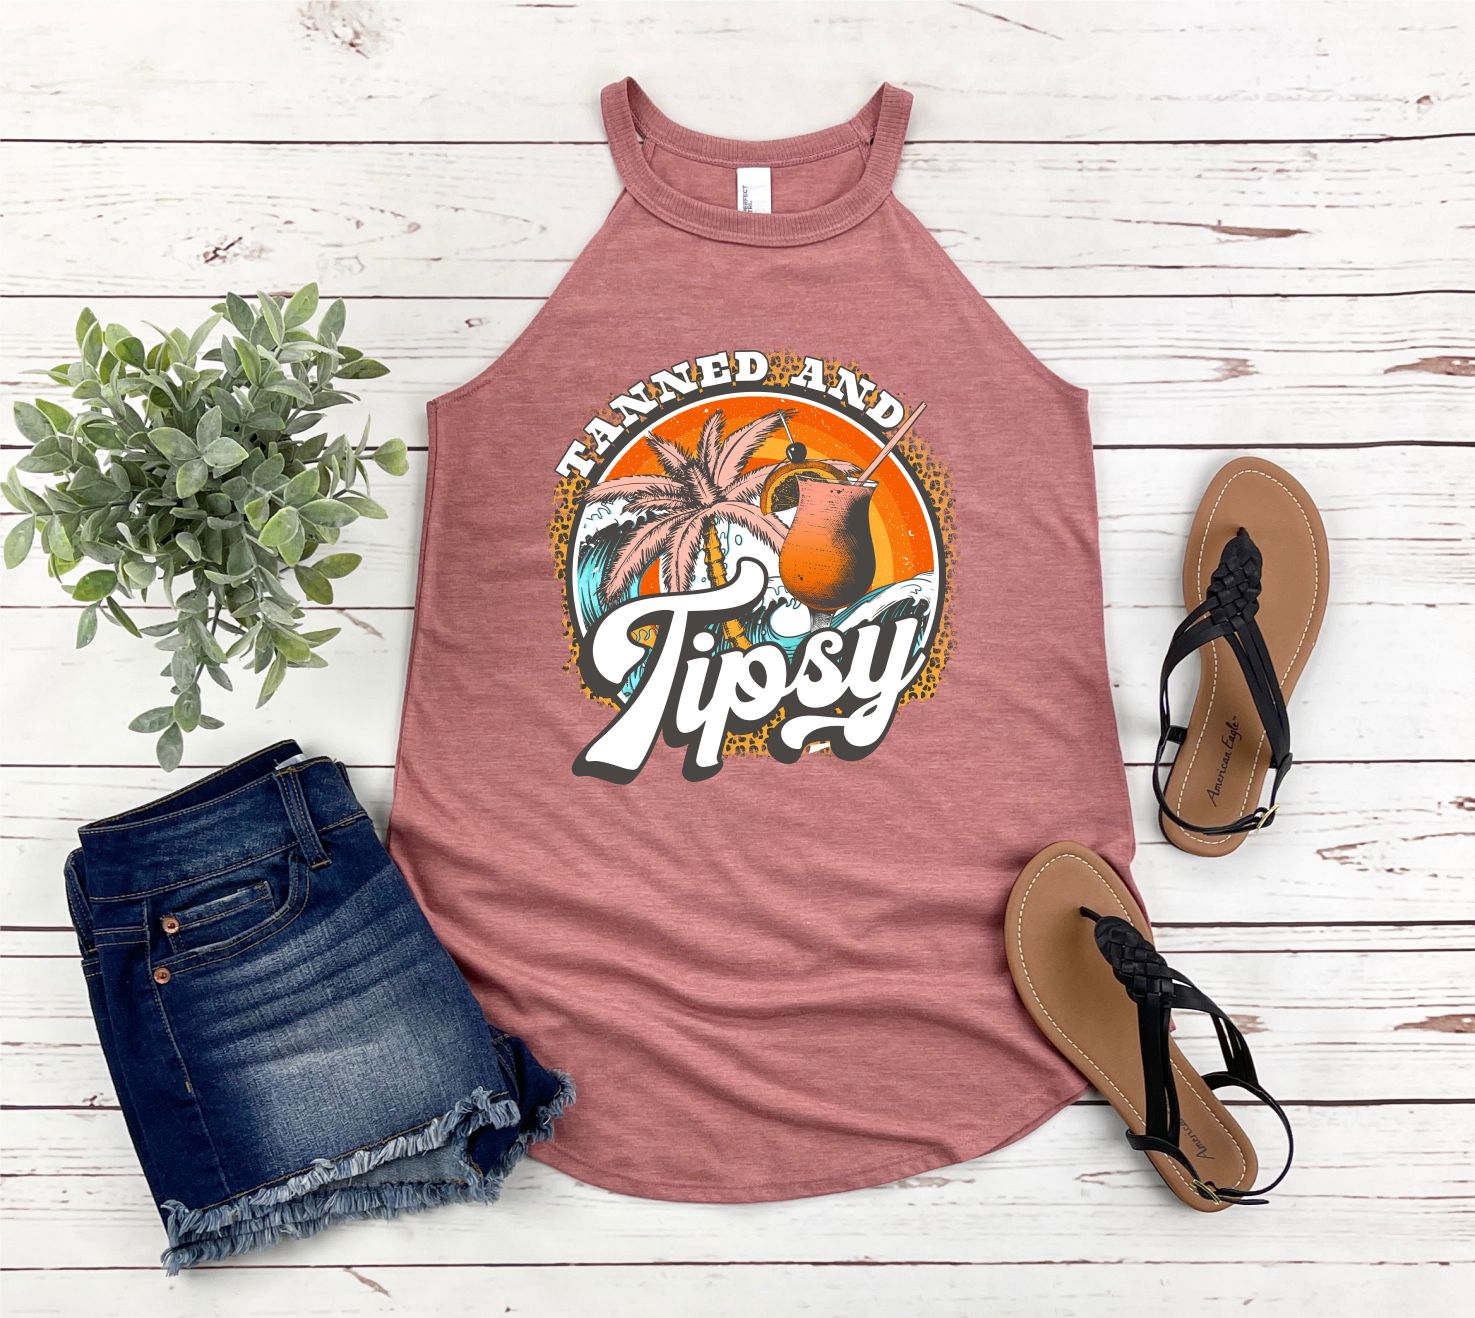 0148 Tanned and Tipsy Rocker Tank